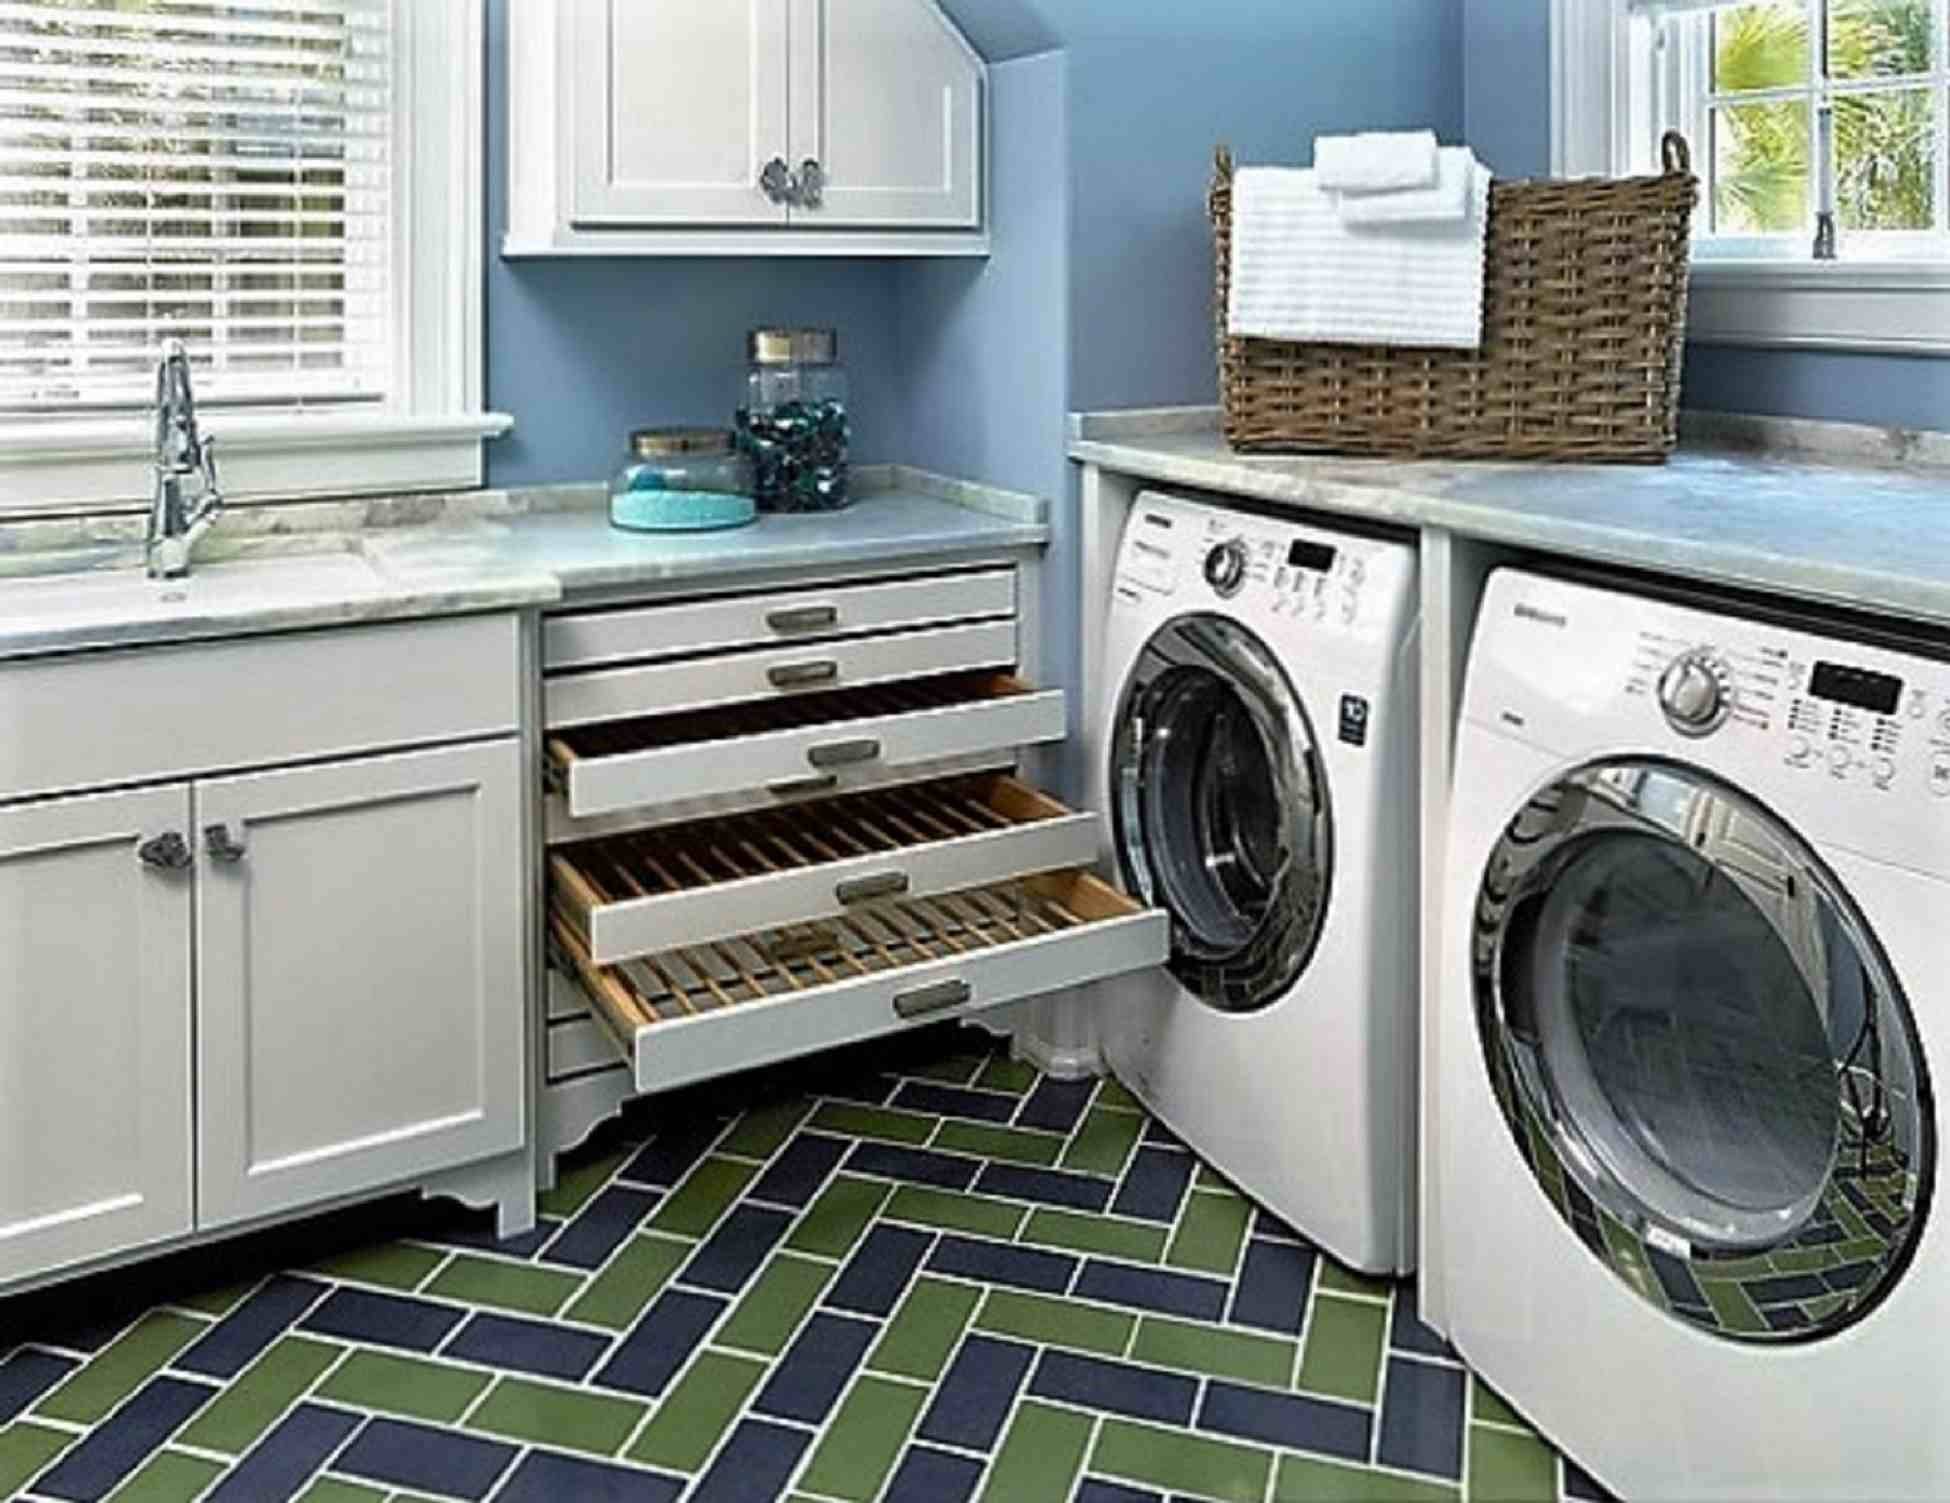 Laundry storage with drawers